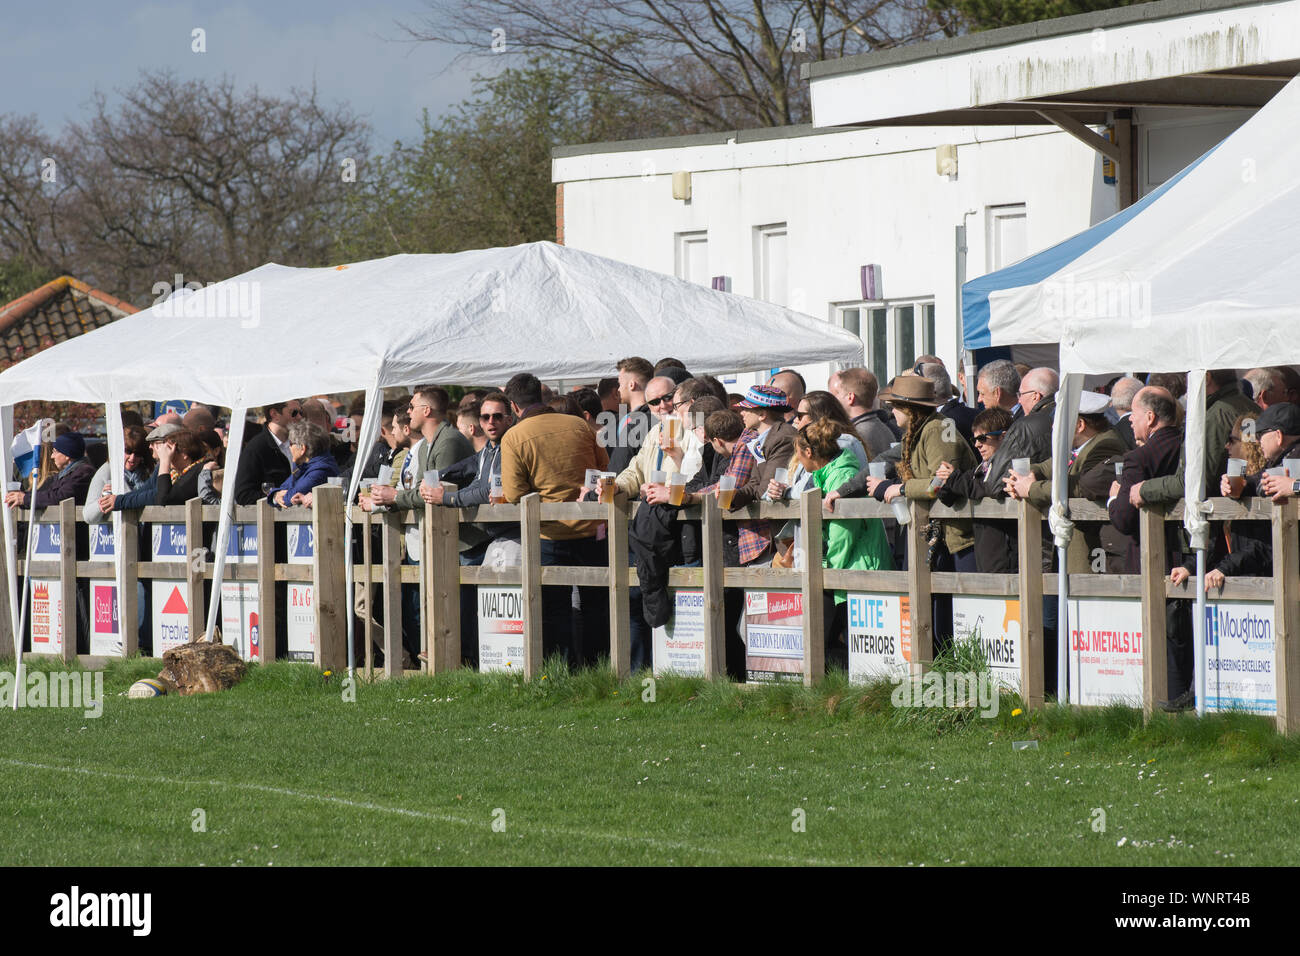 Amateur rugby club supporters pack the fence to watch local derby match Stock Photo